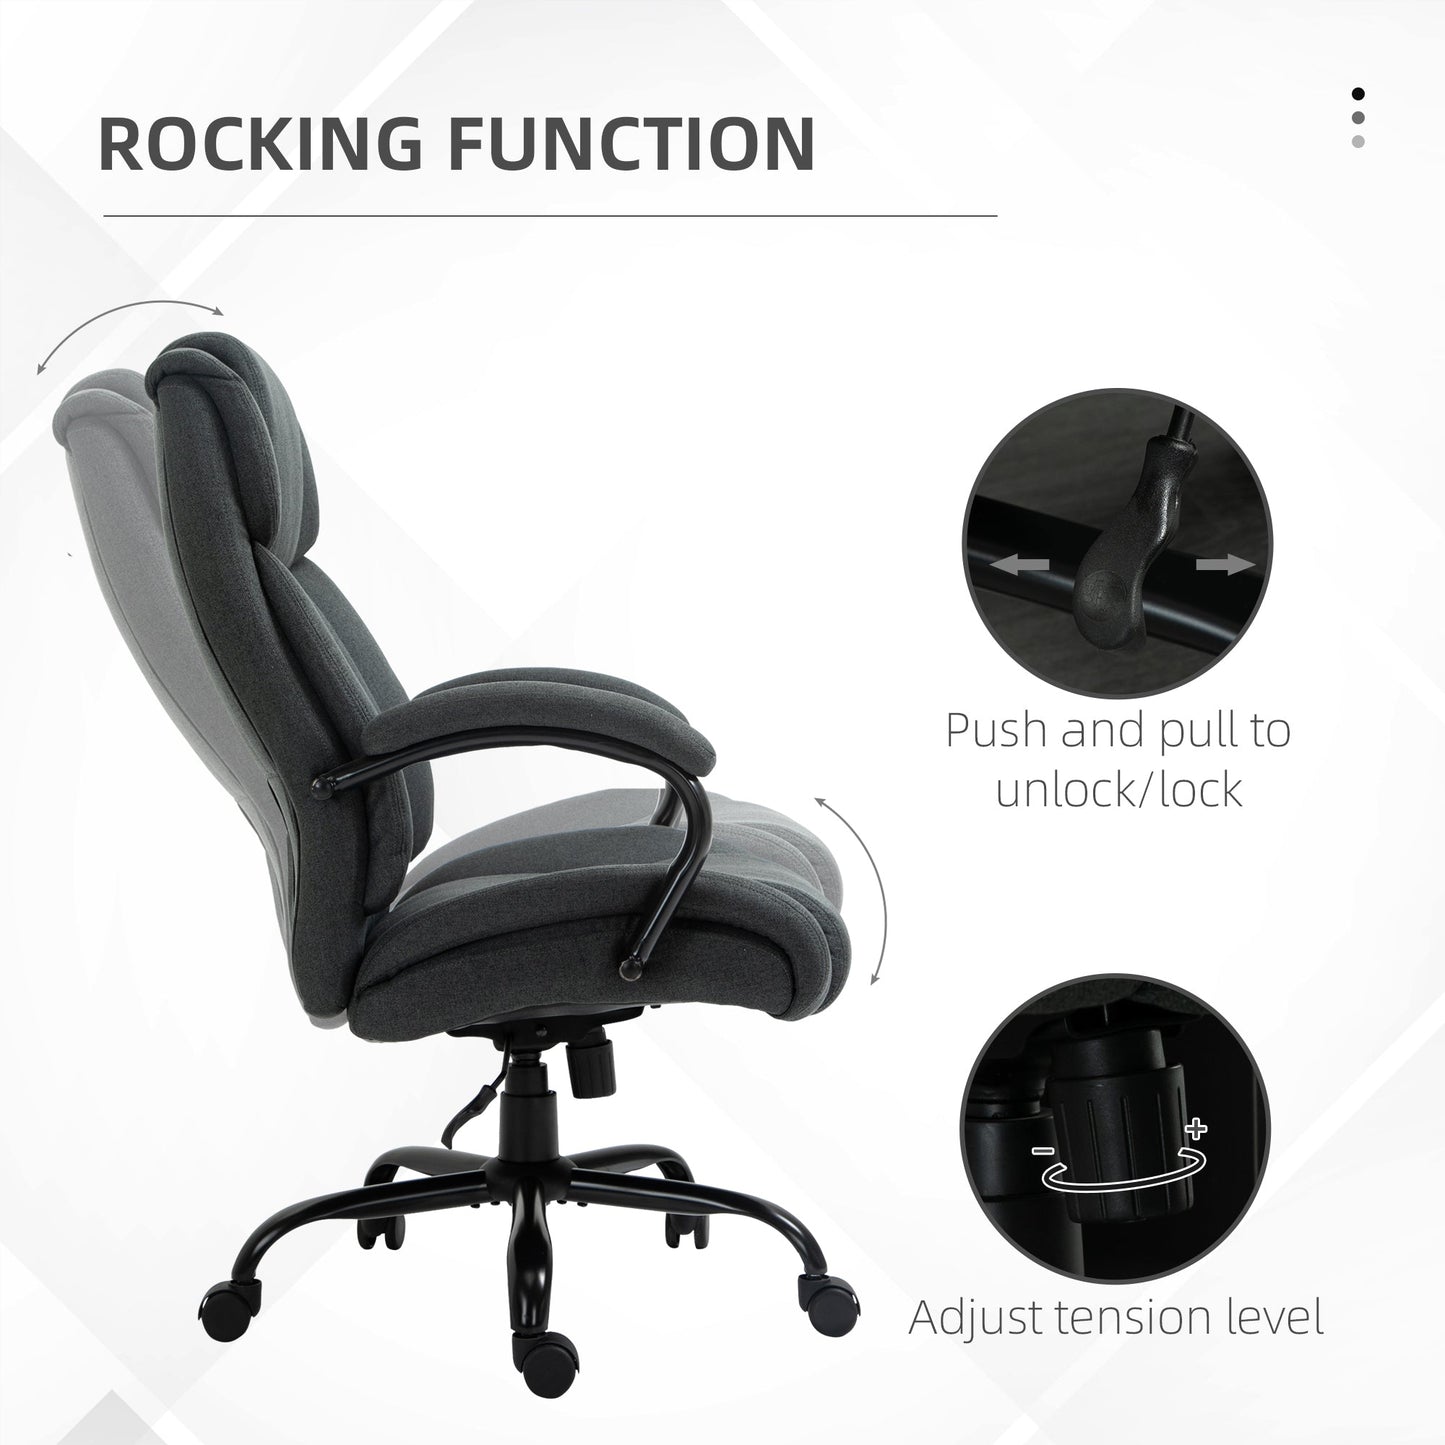 High Back Big and Tall Executive Office Chair 484lbs with Wide Seat, Computer Desk Chair with Linen Fabric, Adjustable Height, Swivel Wheels, Charcoal Grey